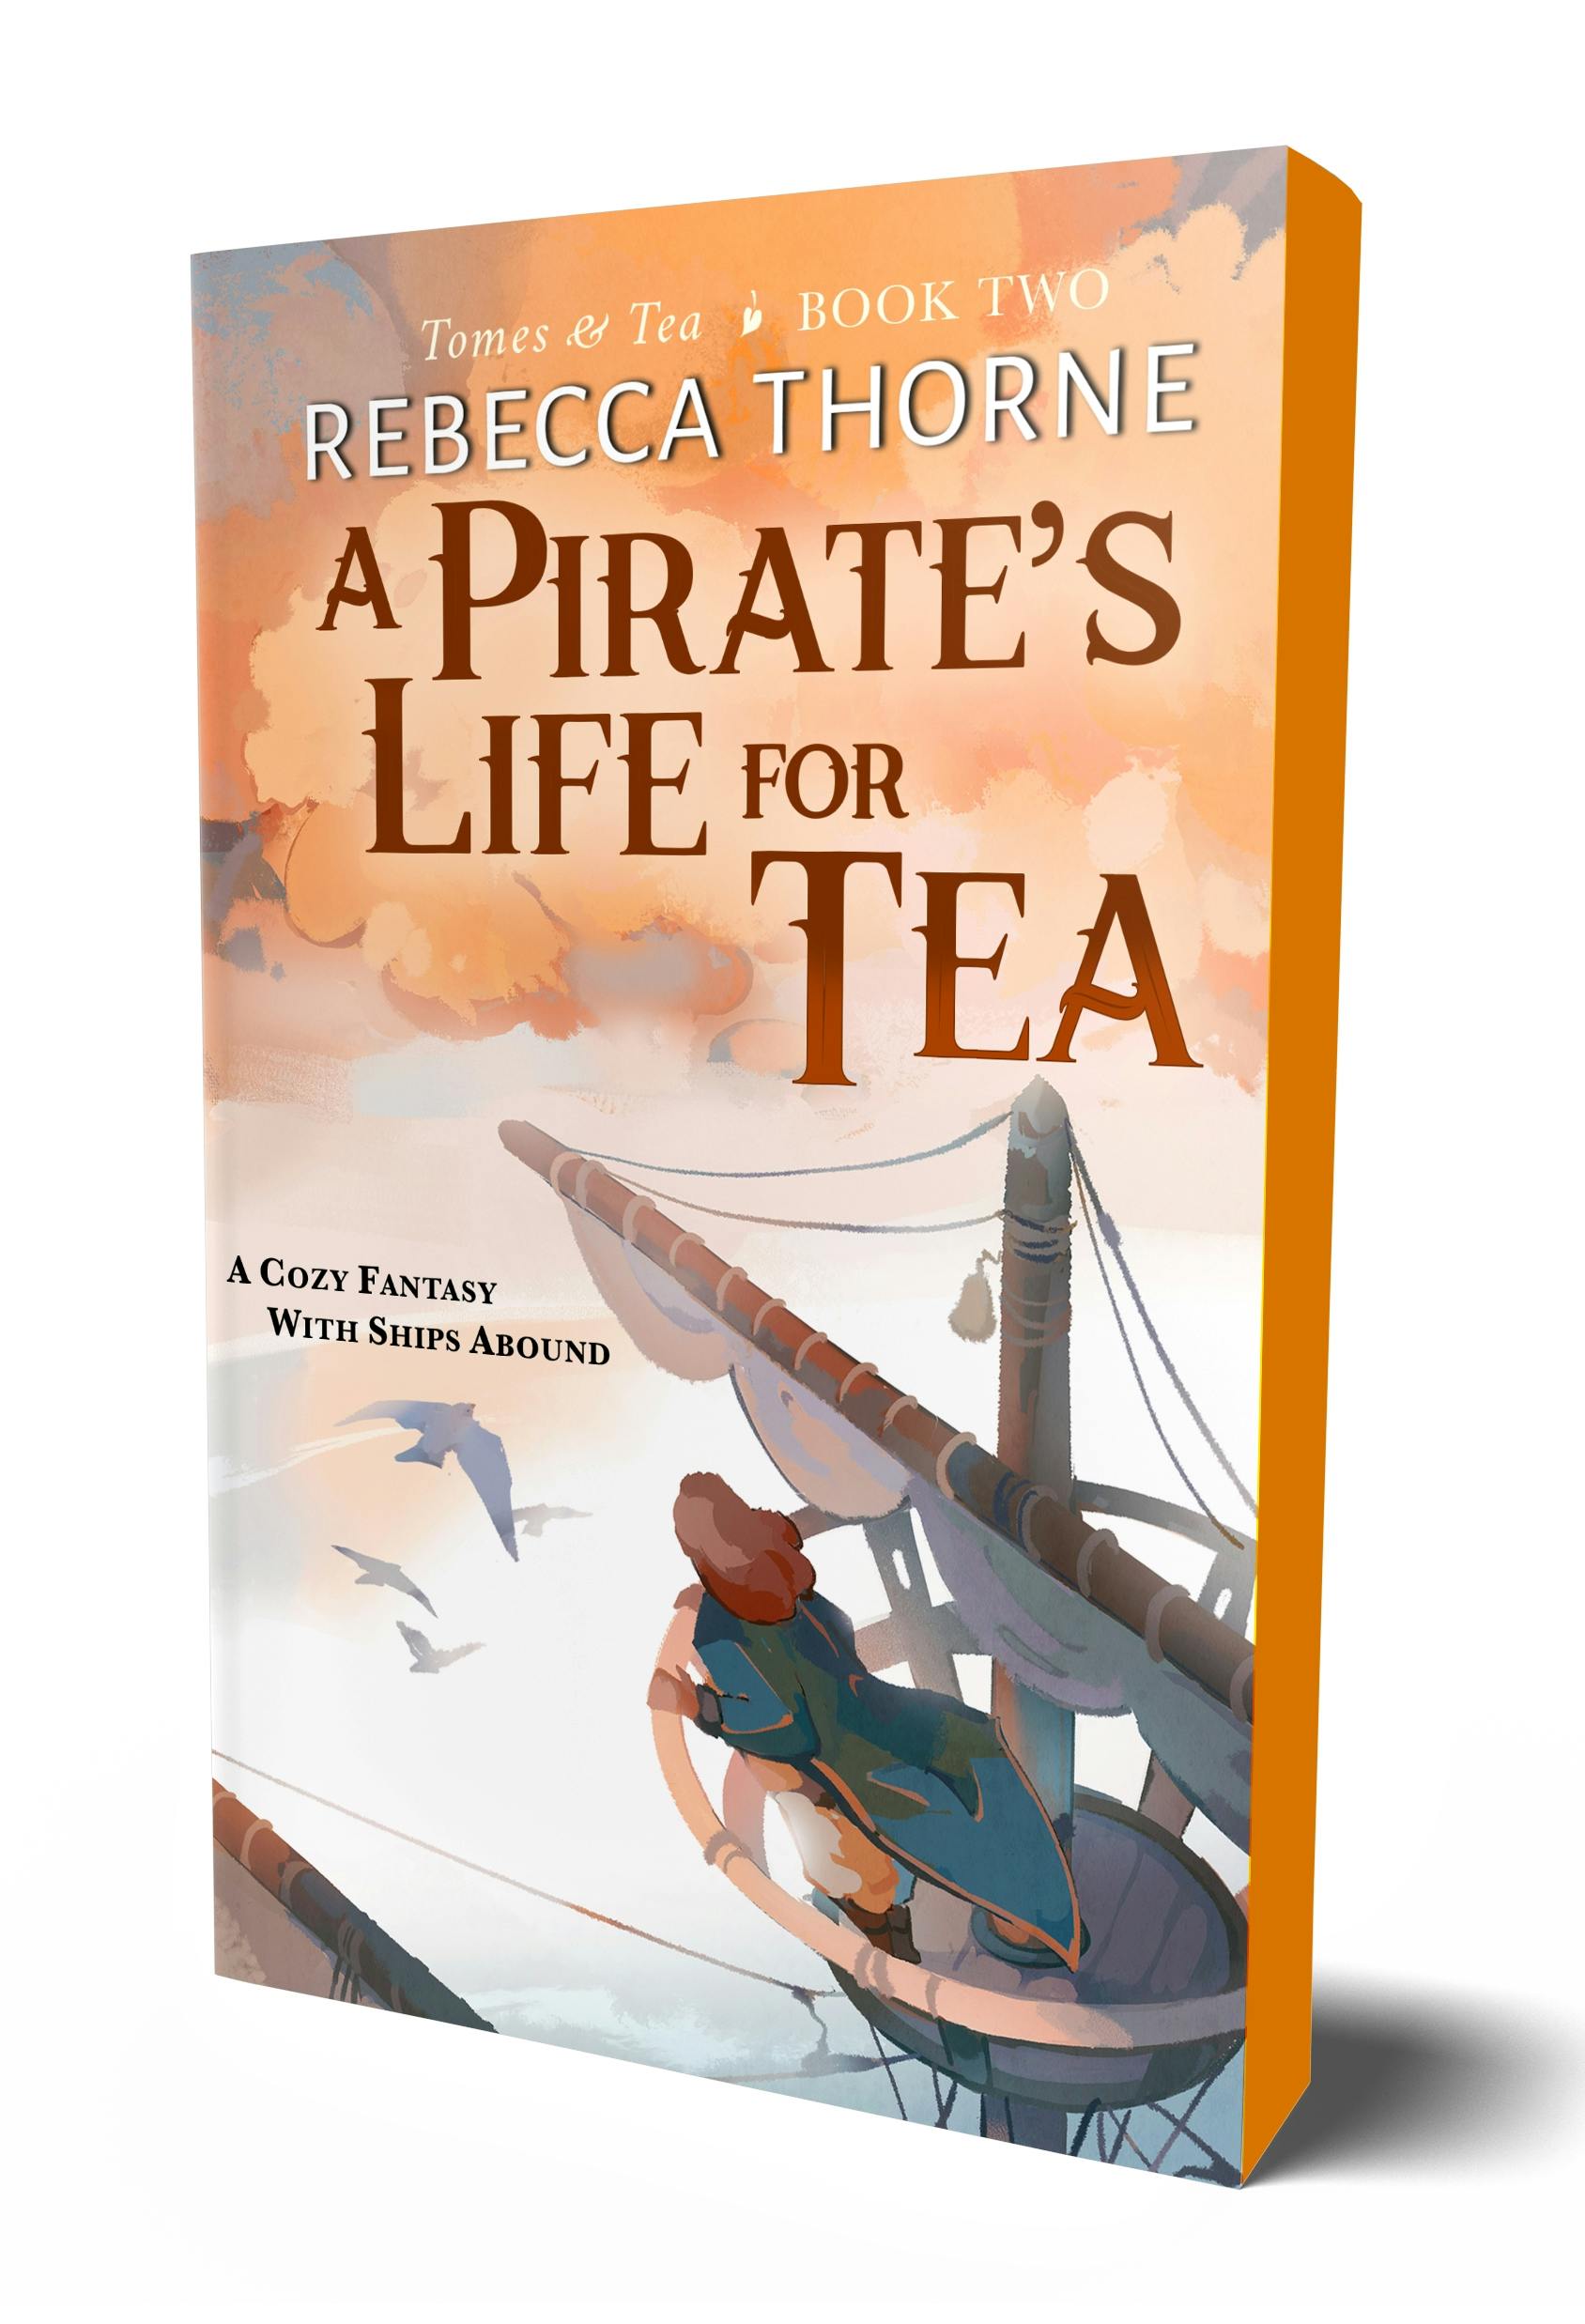 Cover for the book titled as: A Pirate's Life for Tea